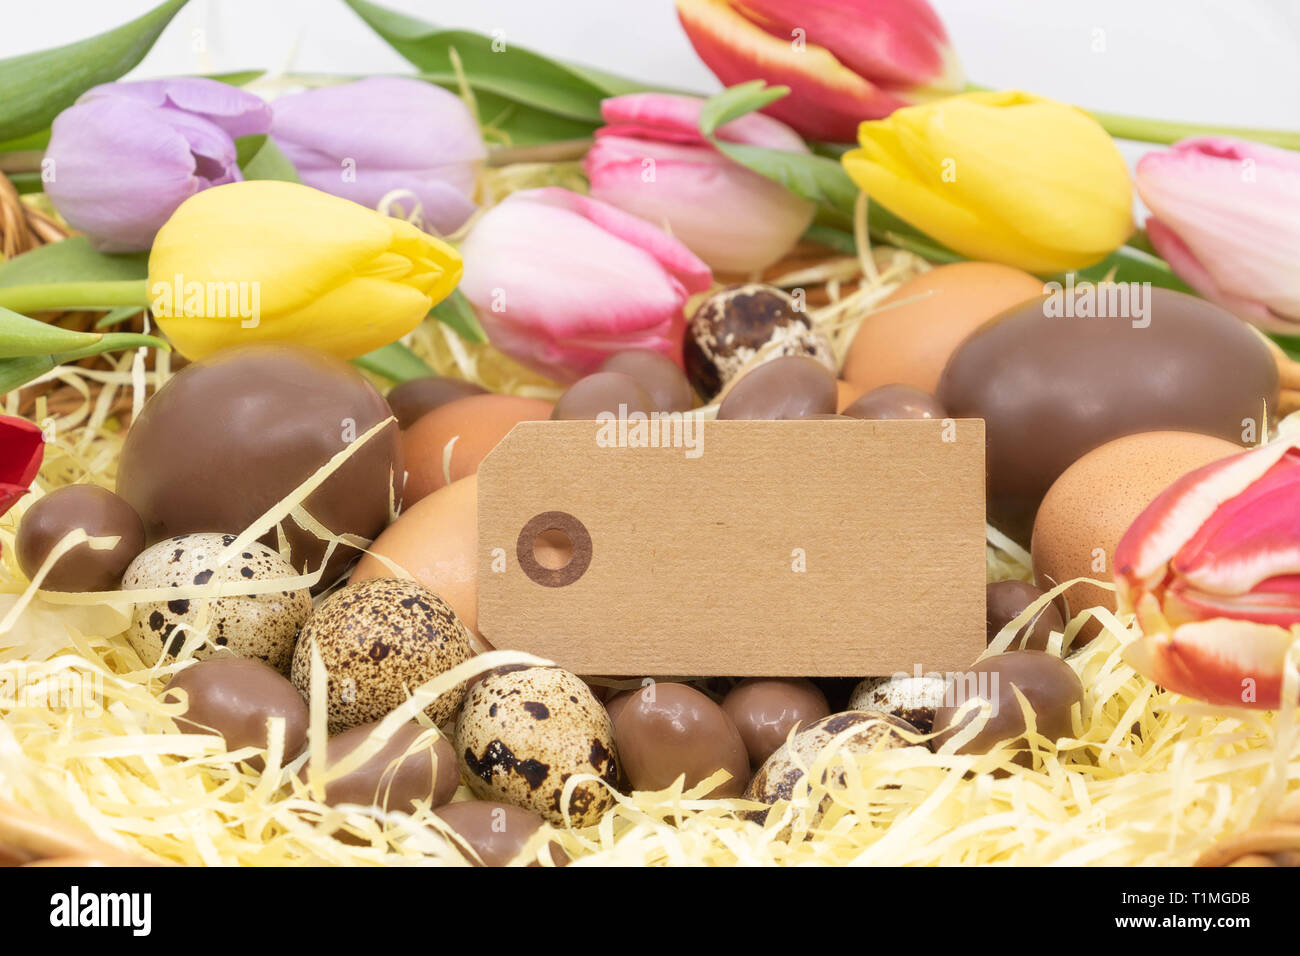 Return of the egg hunt for Easter and the arrival of spring. Label for graphic resource and text Stock Photo